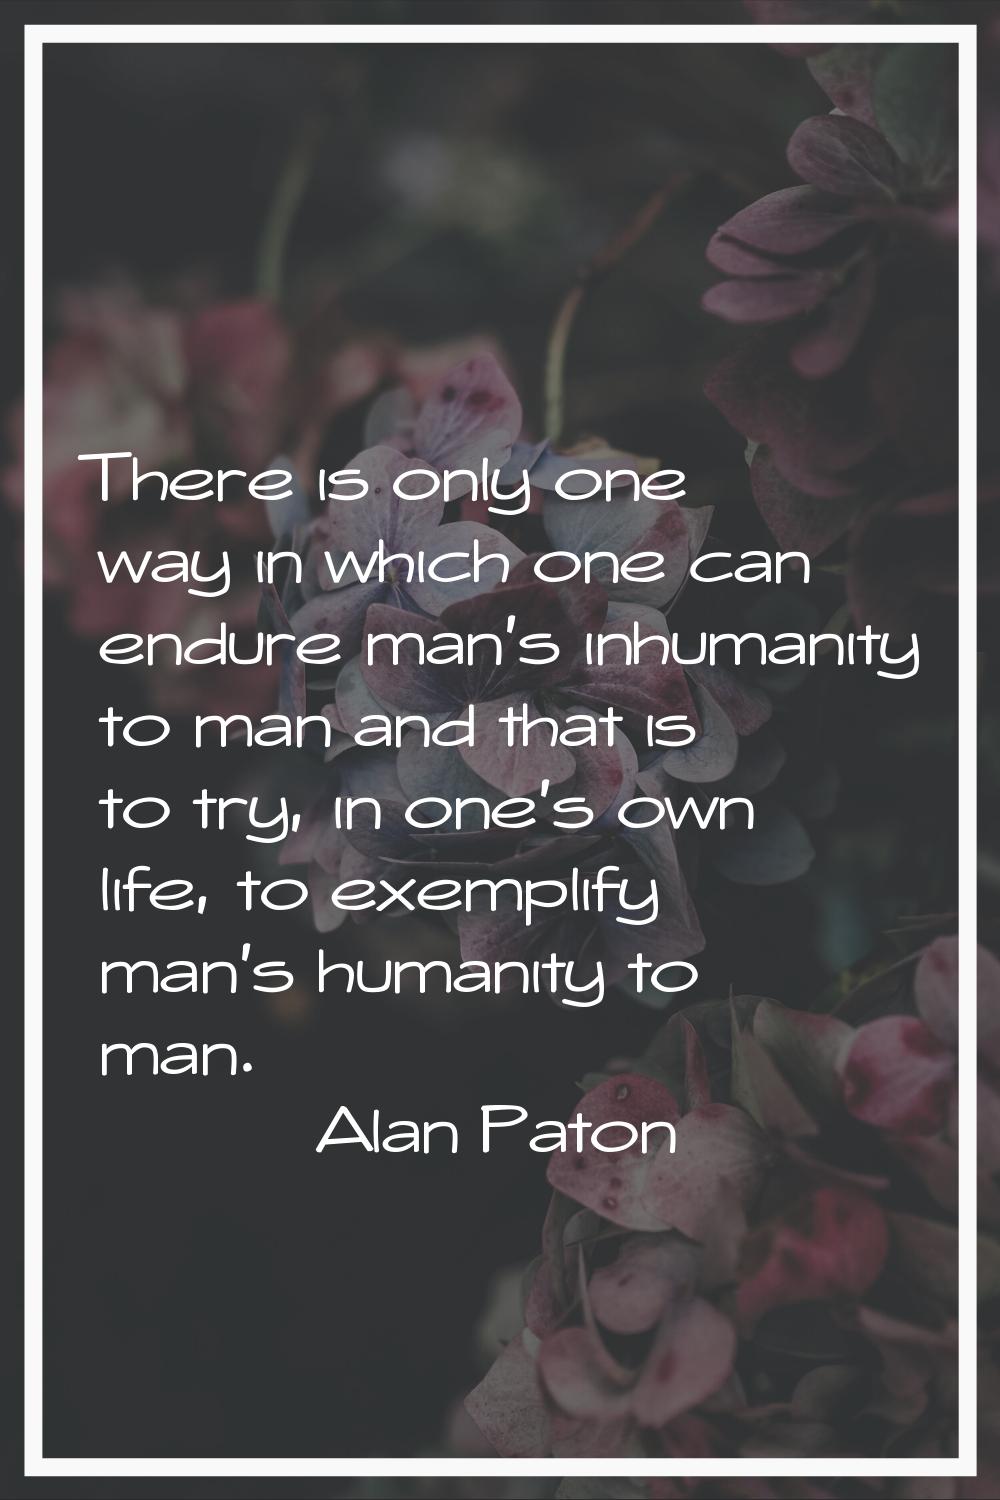 There is only one way in which one can endure man's inhumanity to man and that is to try, in one's 